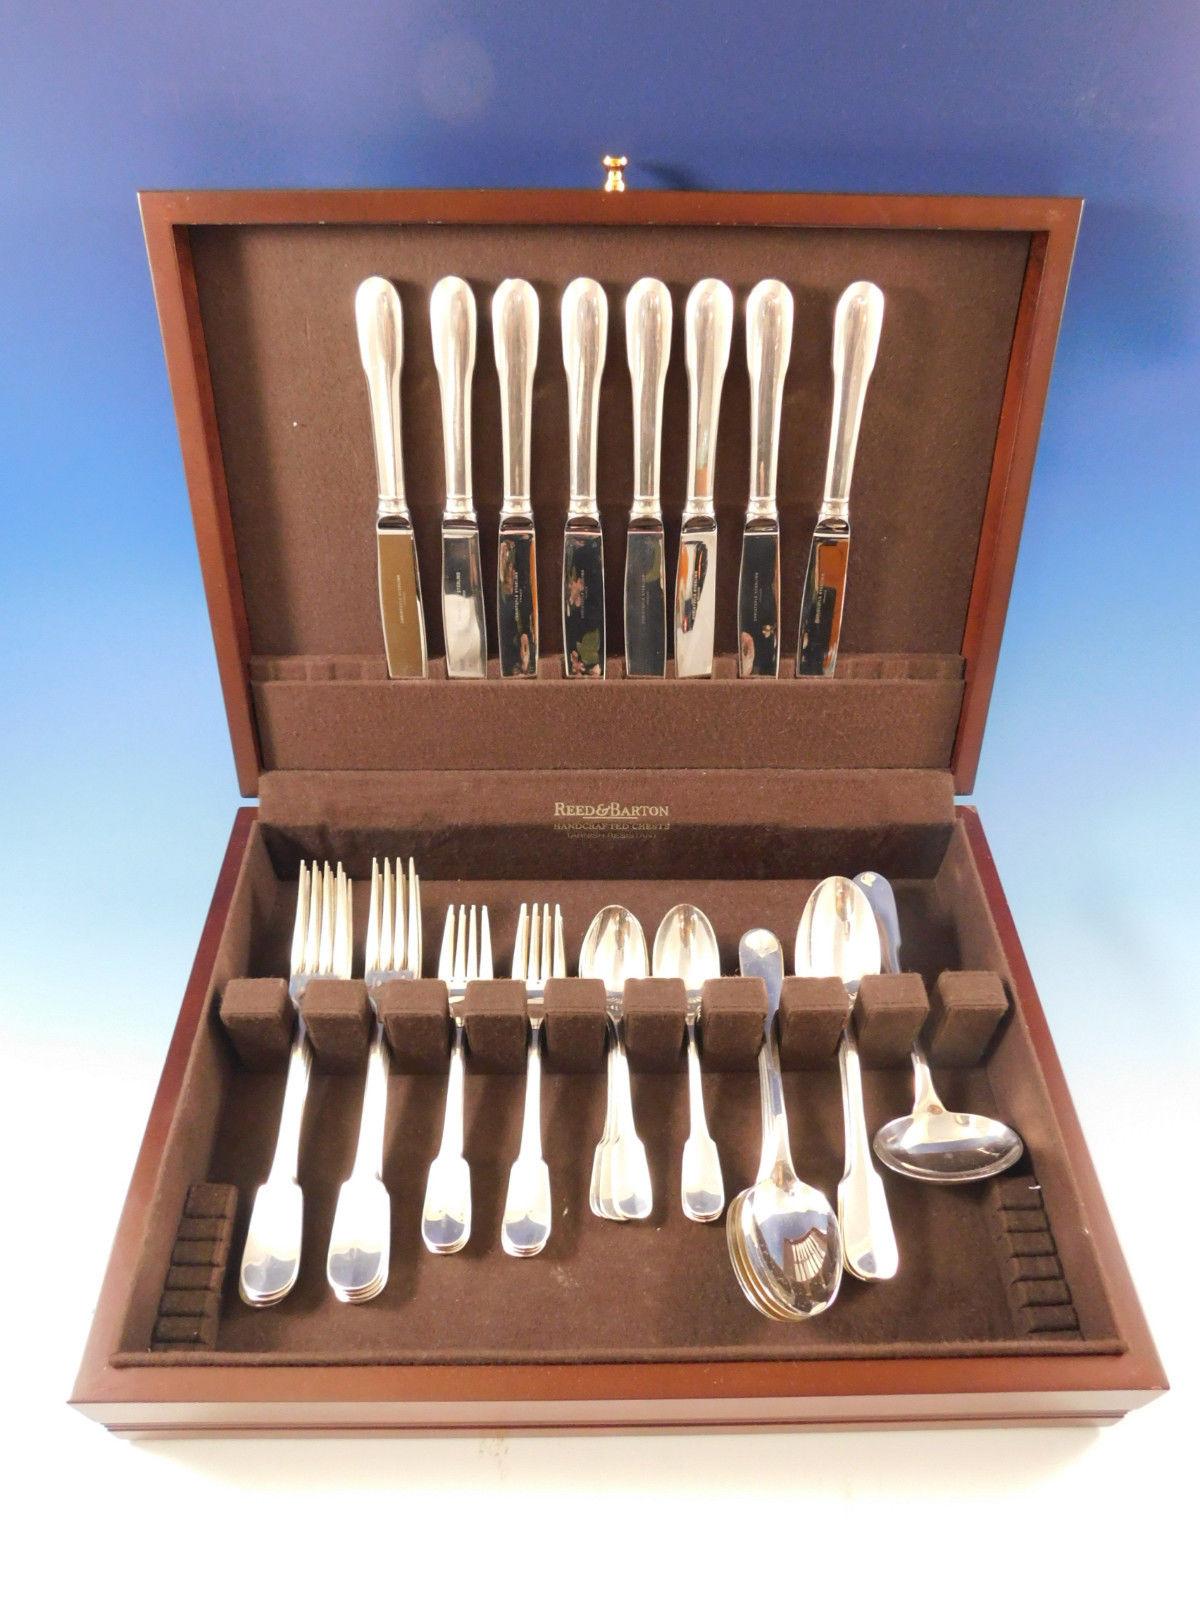 Superb dinner size cluny by Christofle France sterling silver flatware set of 41 pieces. This set includes:

Eight dinner size knives, 9 3/4